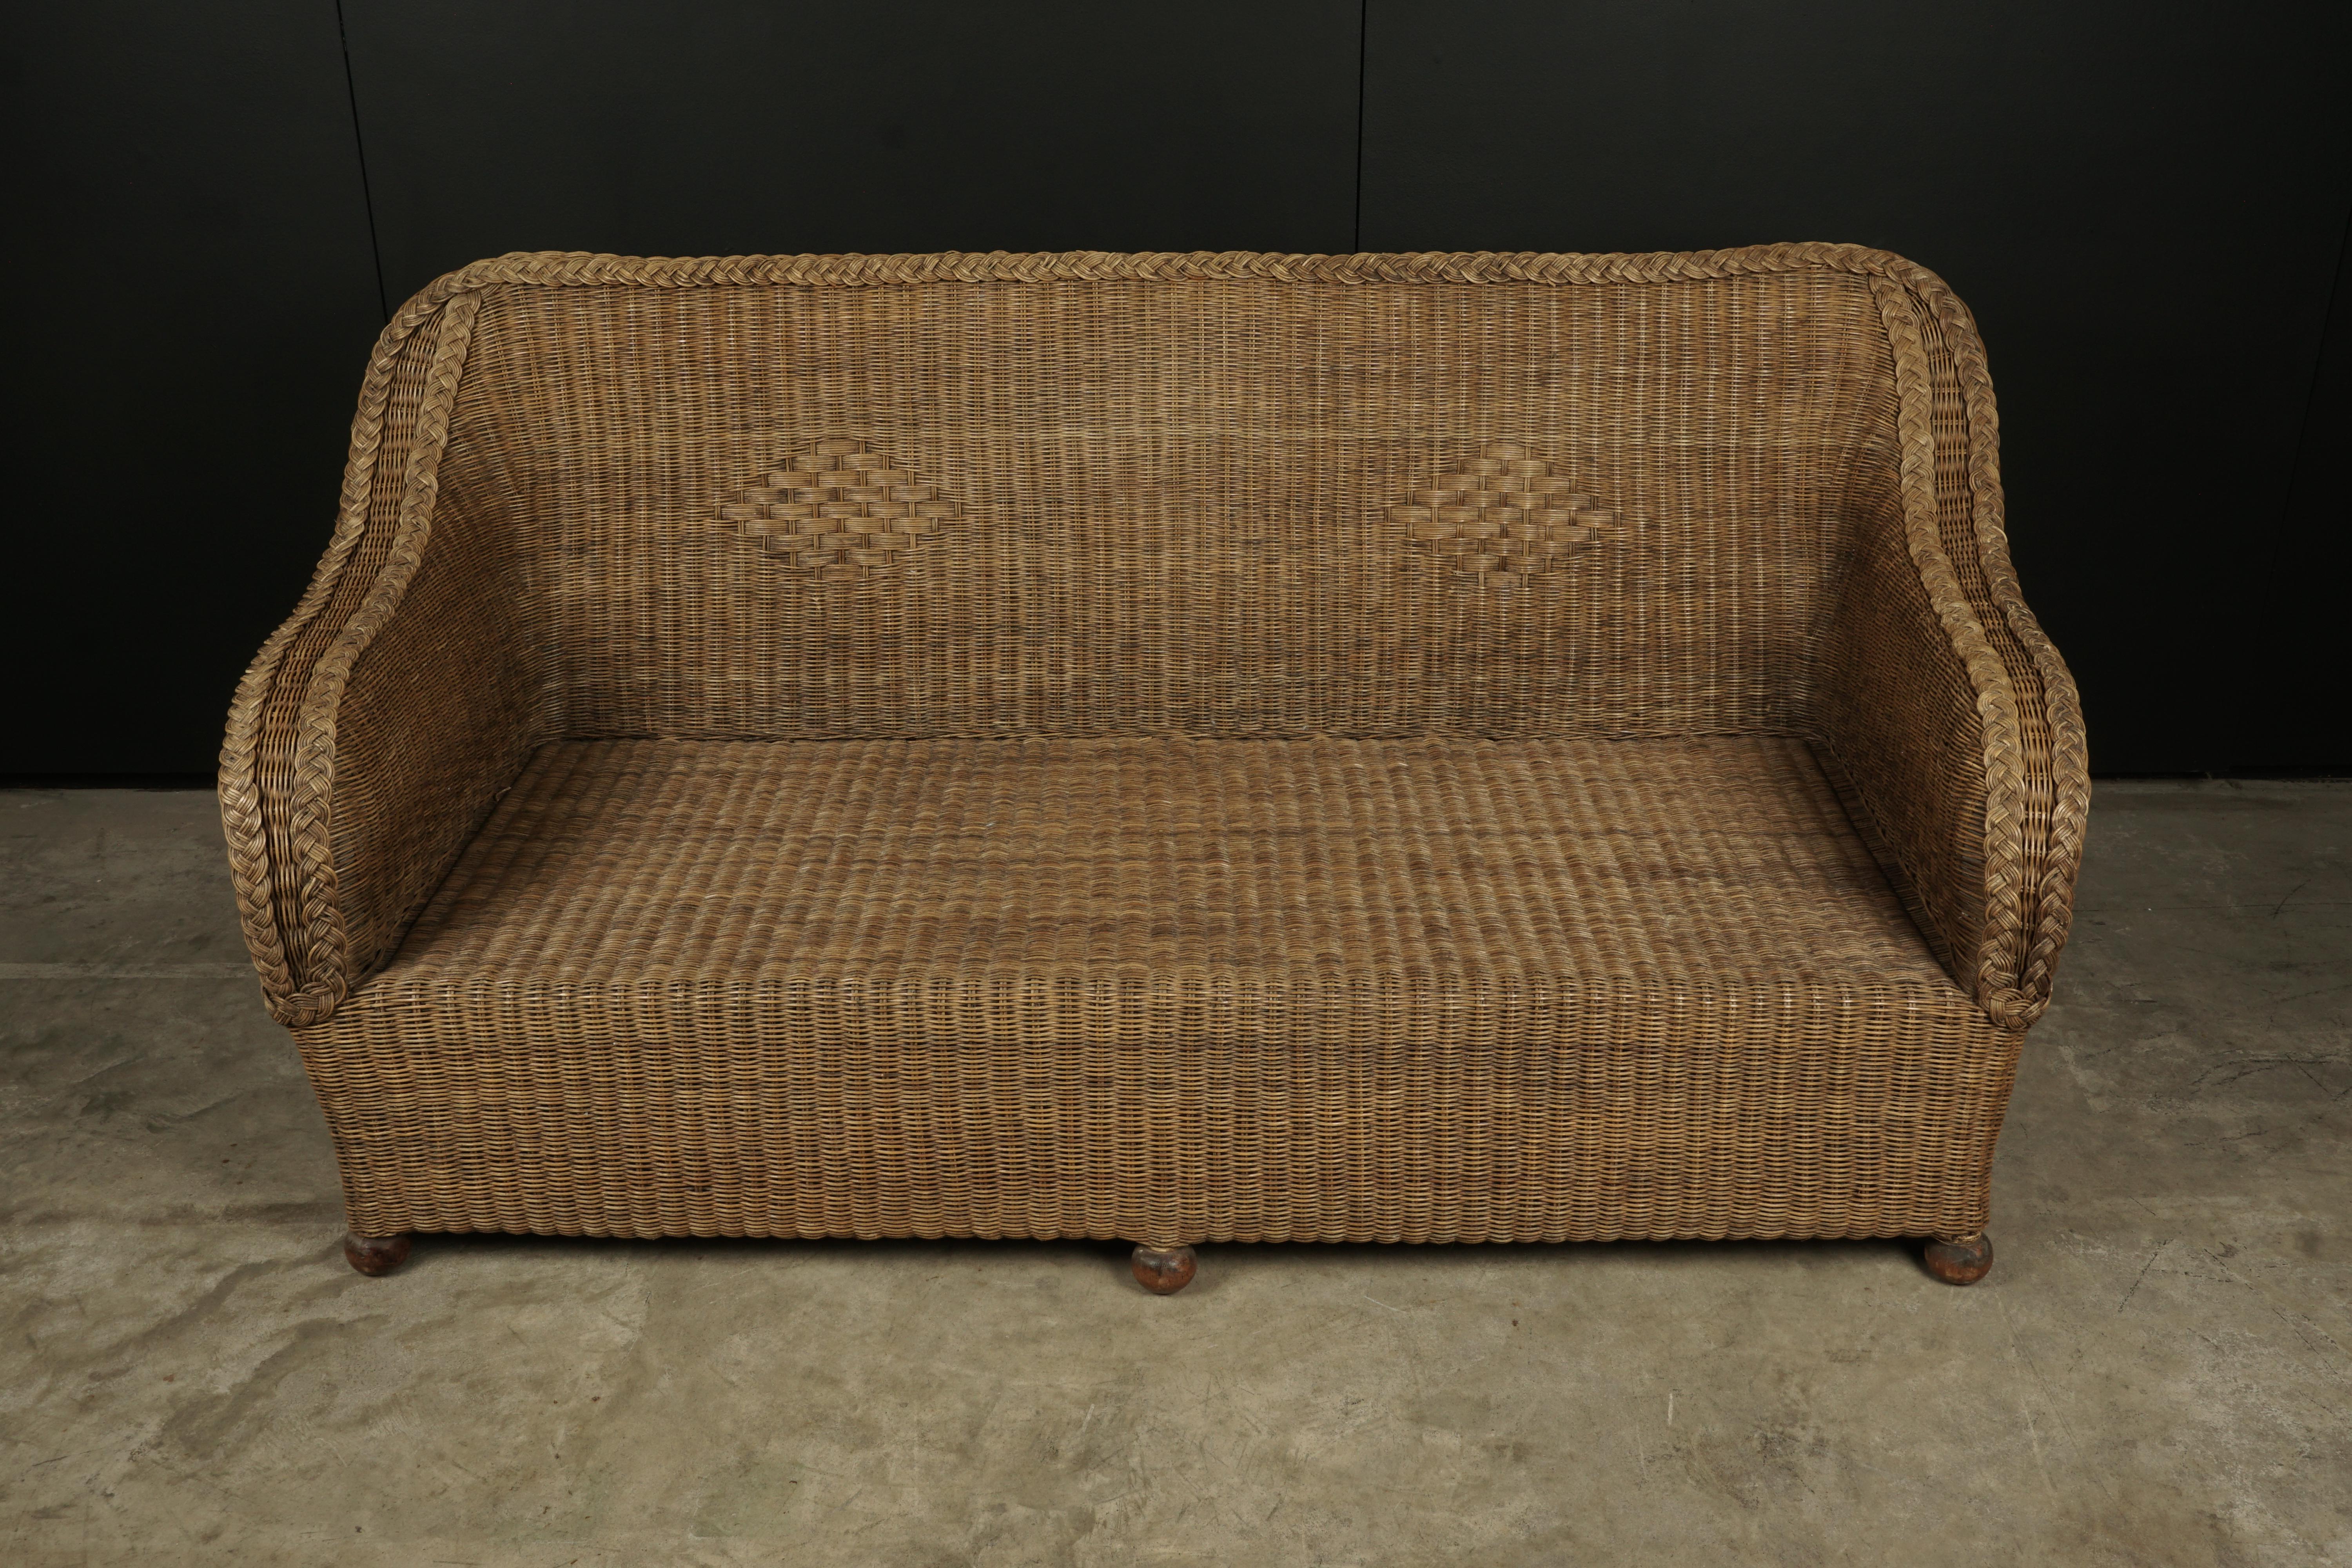 Vintage Rattan sofa from France, 1950s. Solid bamboo and rattan construction. Original cushion included. Light wear and use.